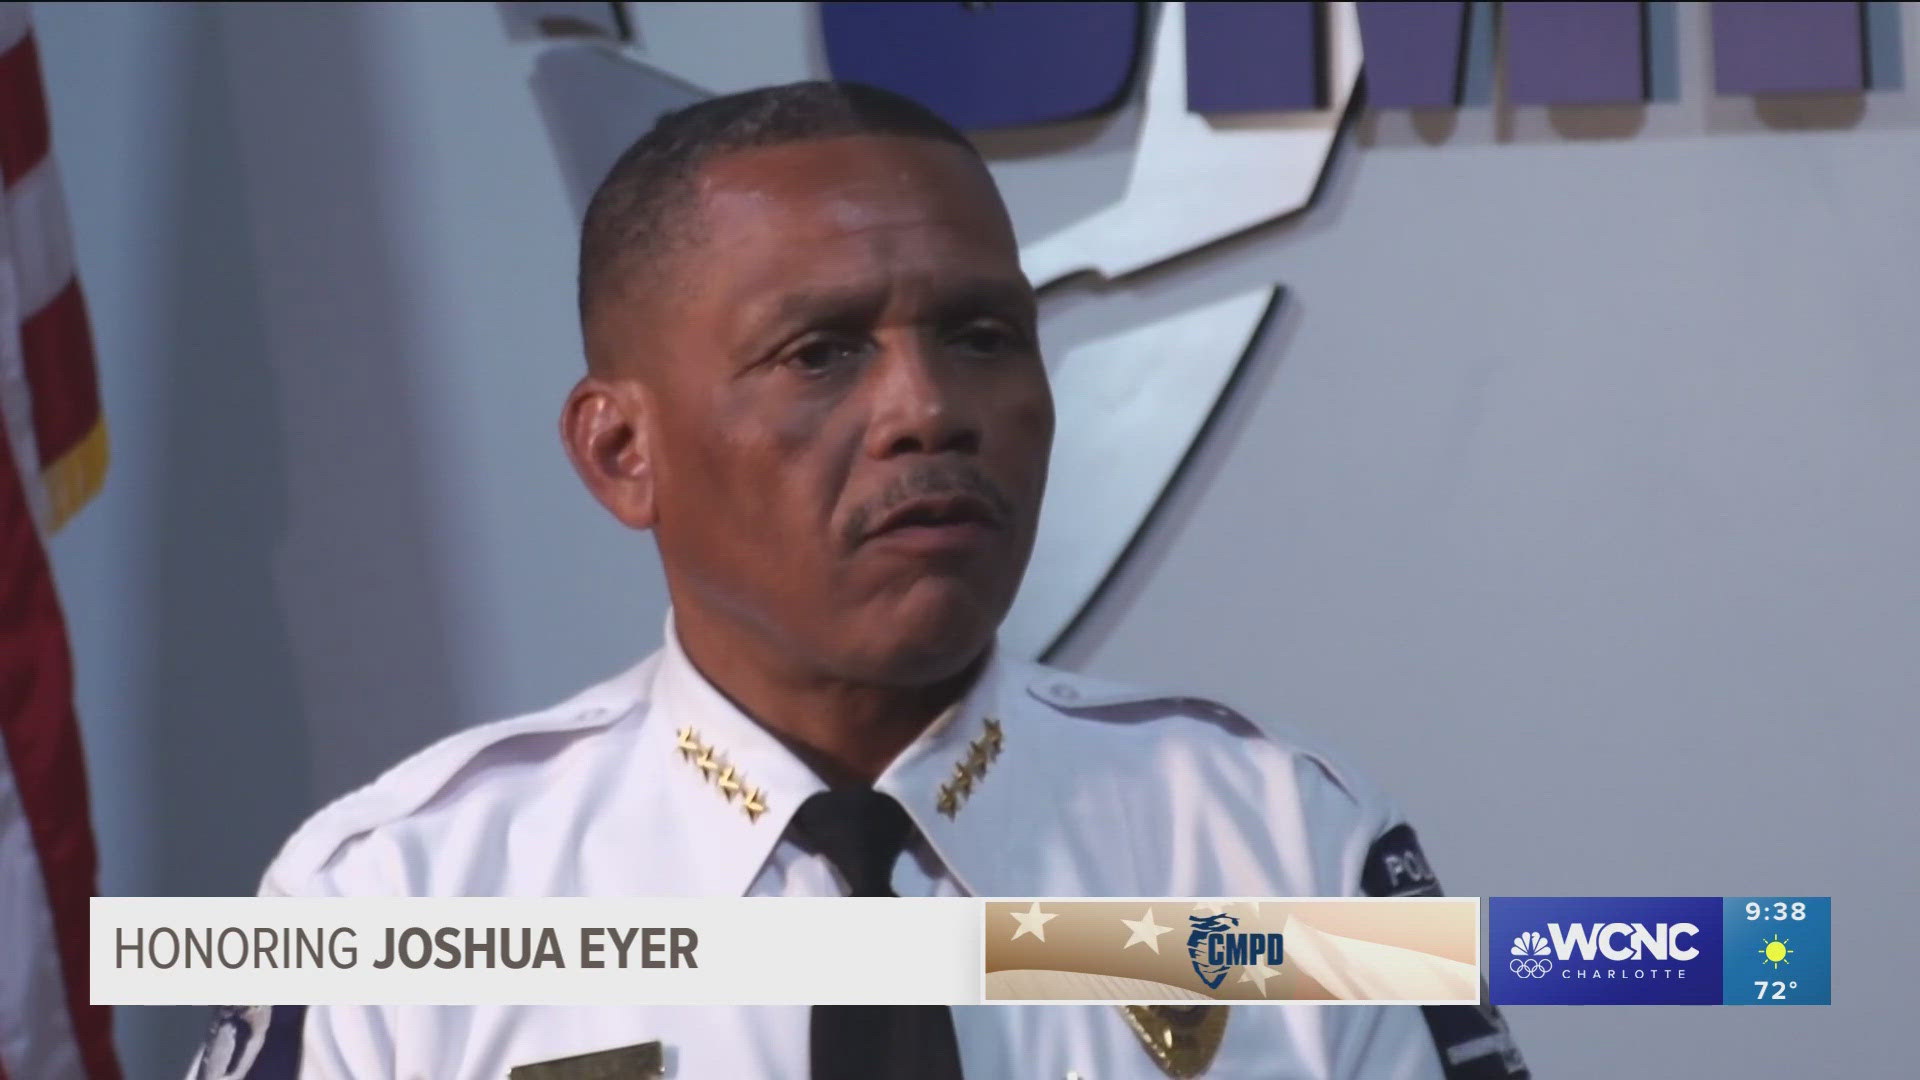 Joshua Eyer served in multiple capacities, including 12 years with the North Carolina National Guard.